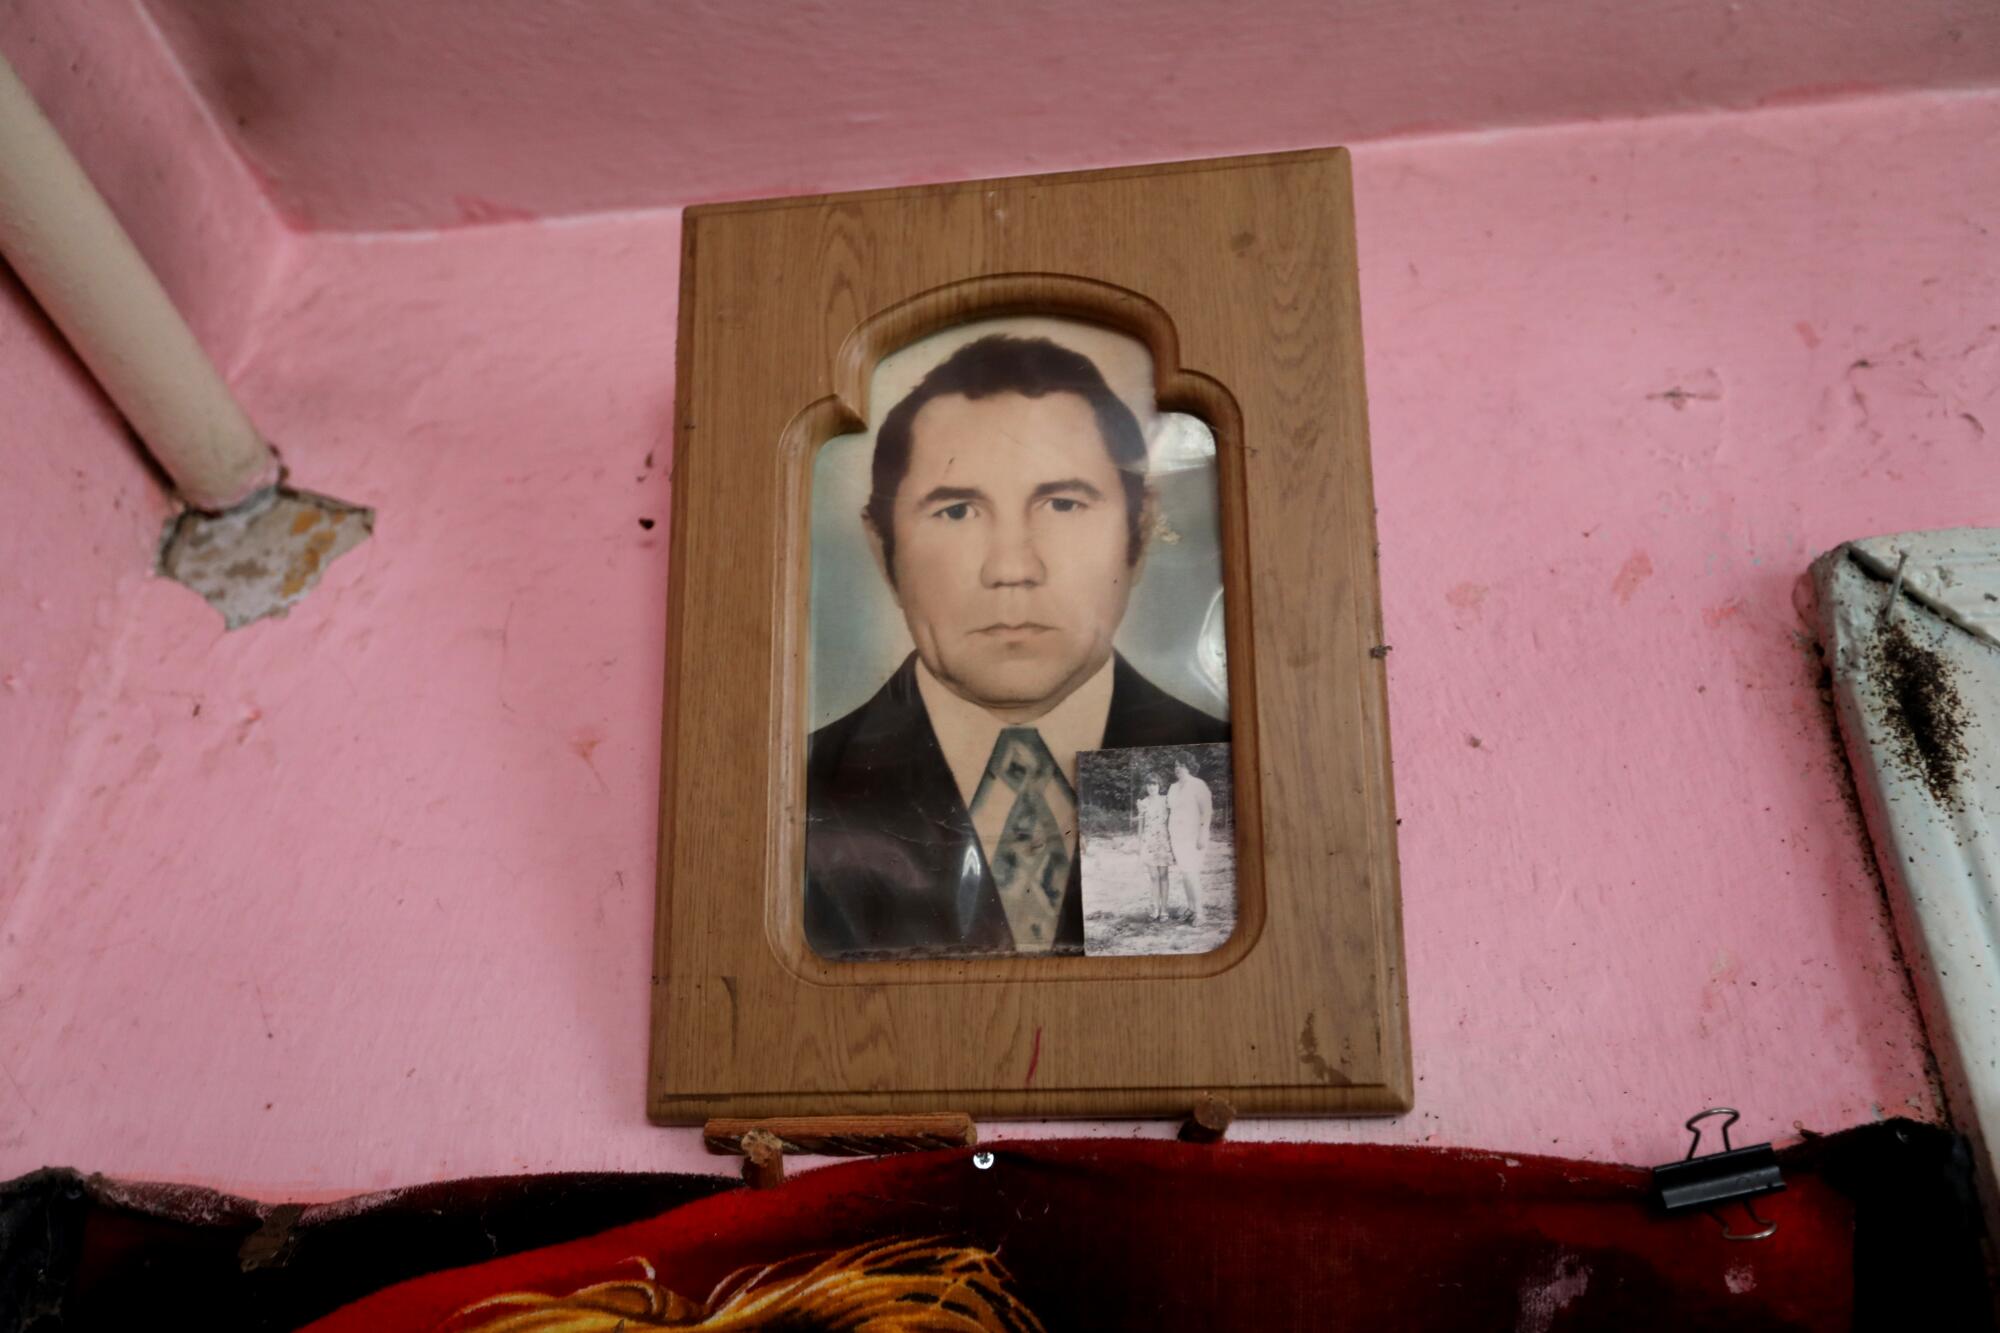 A picture of Anatolii Oliinyk, 90, hangs above the bed where he was found by his son.